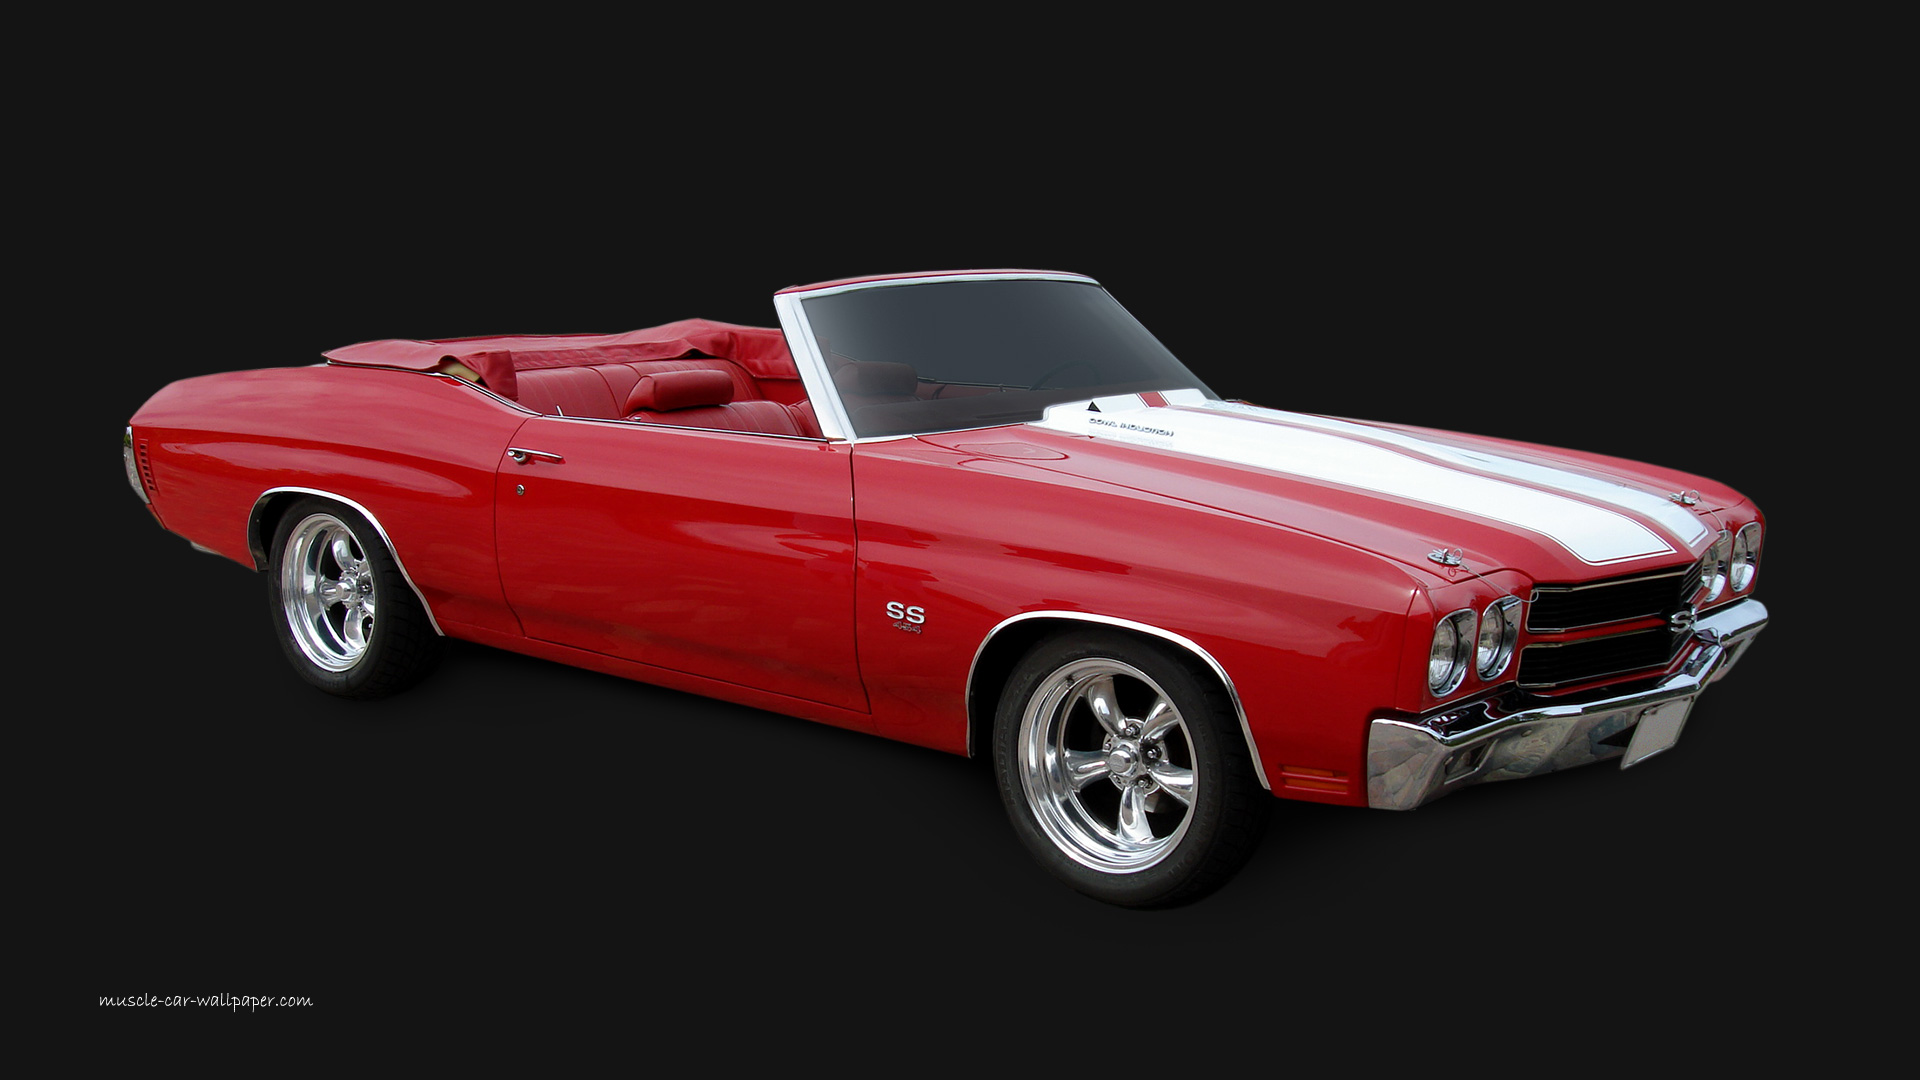 1970 Chevelle SS Wallpaper Red Convertible 1920 05